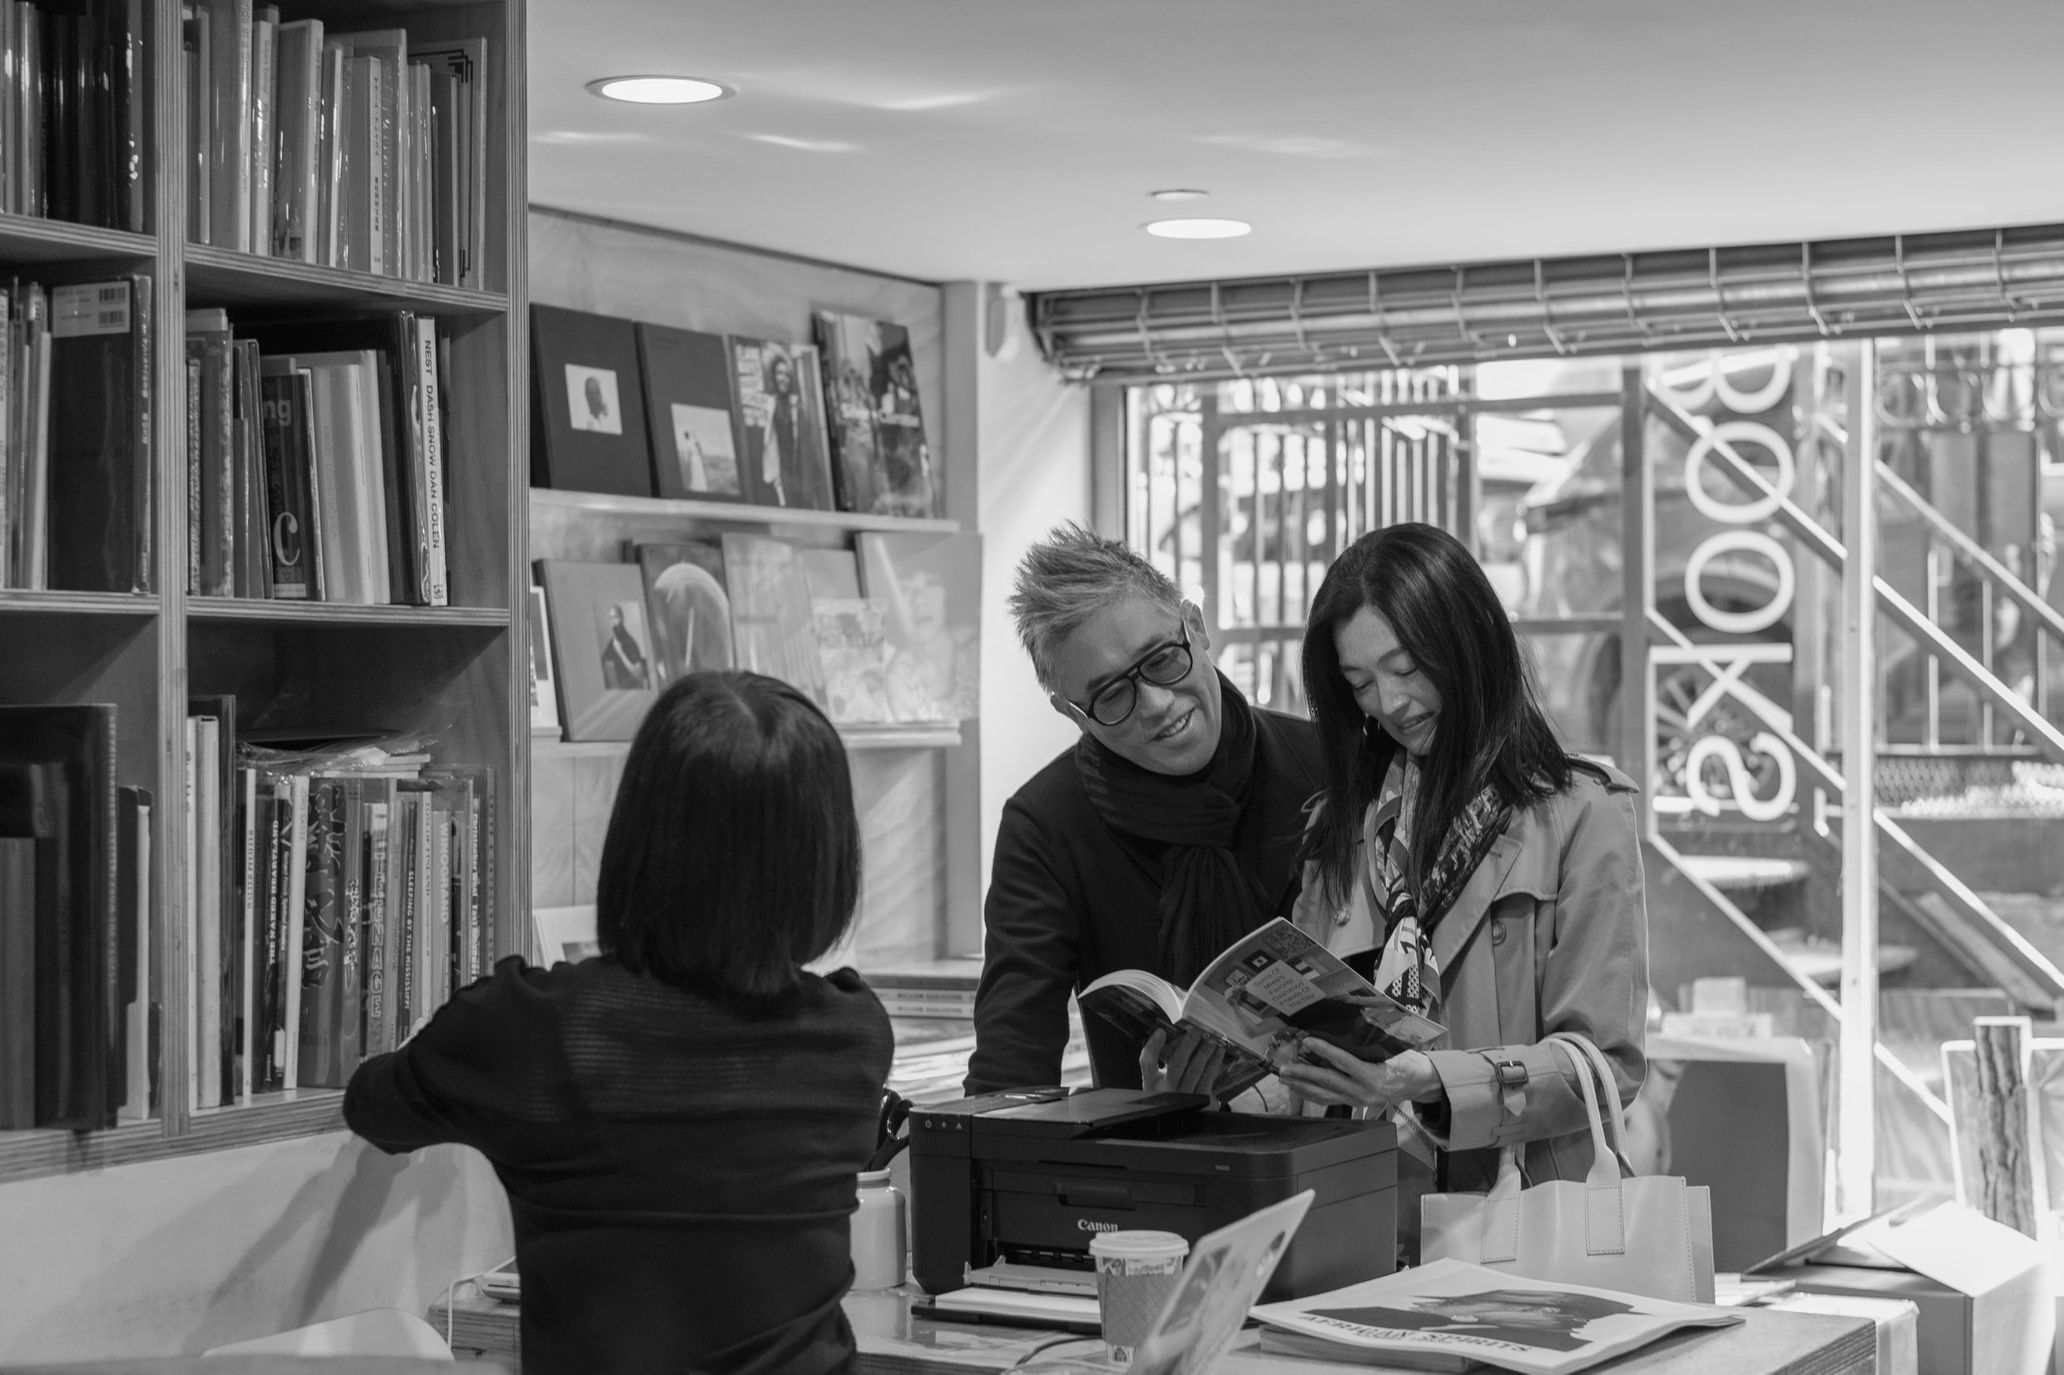 Interview with Miwa Susuda, Manager of Dashwood Books, on the Importance of Real Store and the Potential of Photobooks